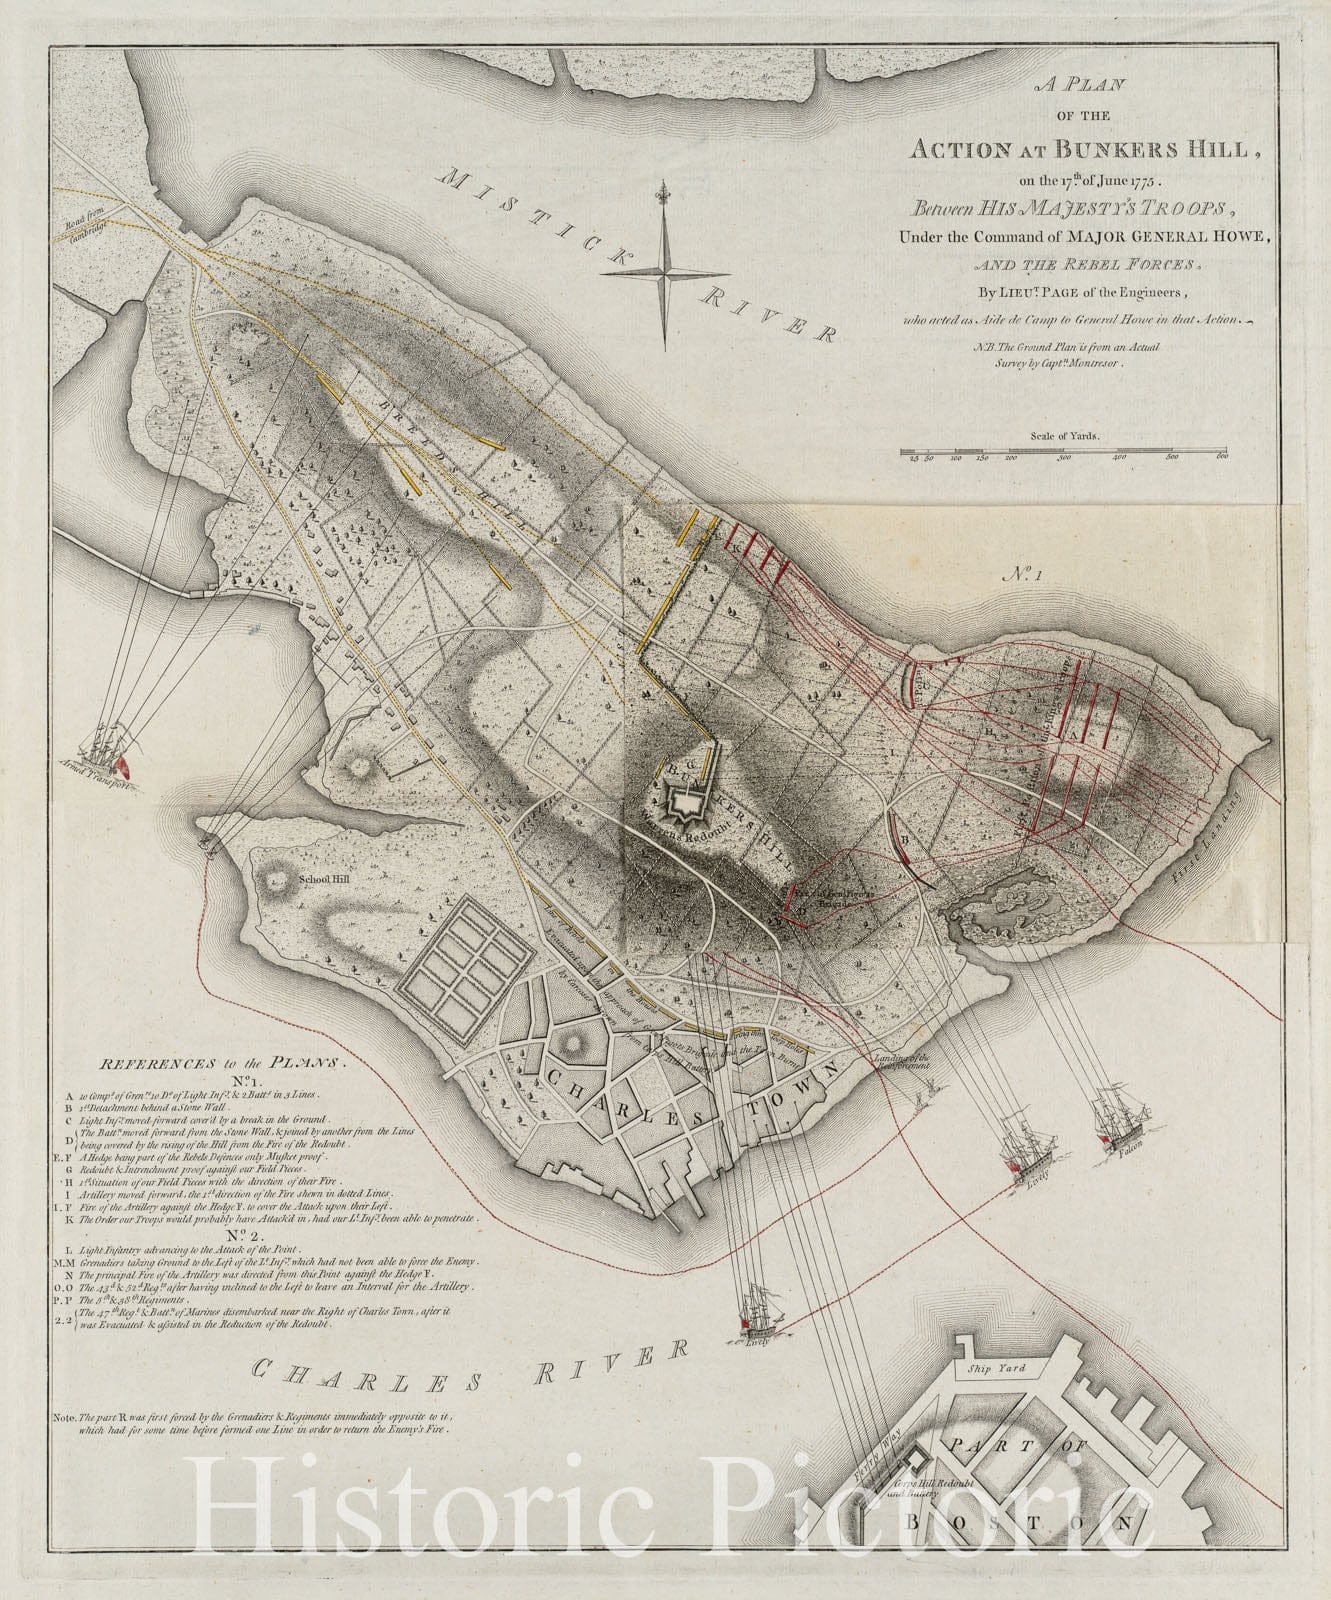 Historical Map, 1778 A Plan of the action at Bunkers Hill, on the 17th. of June, 1775 : between His Majesty's troops under the command of Major General Howe, and the rebel forces Reprint